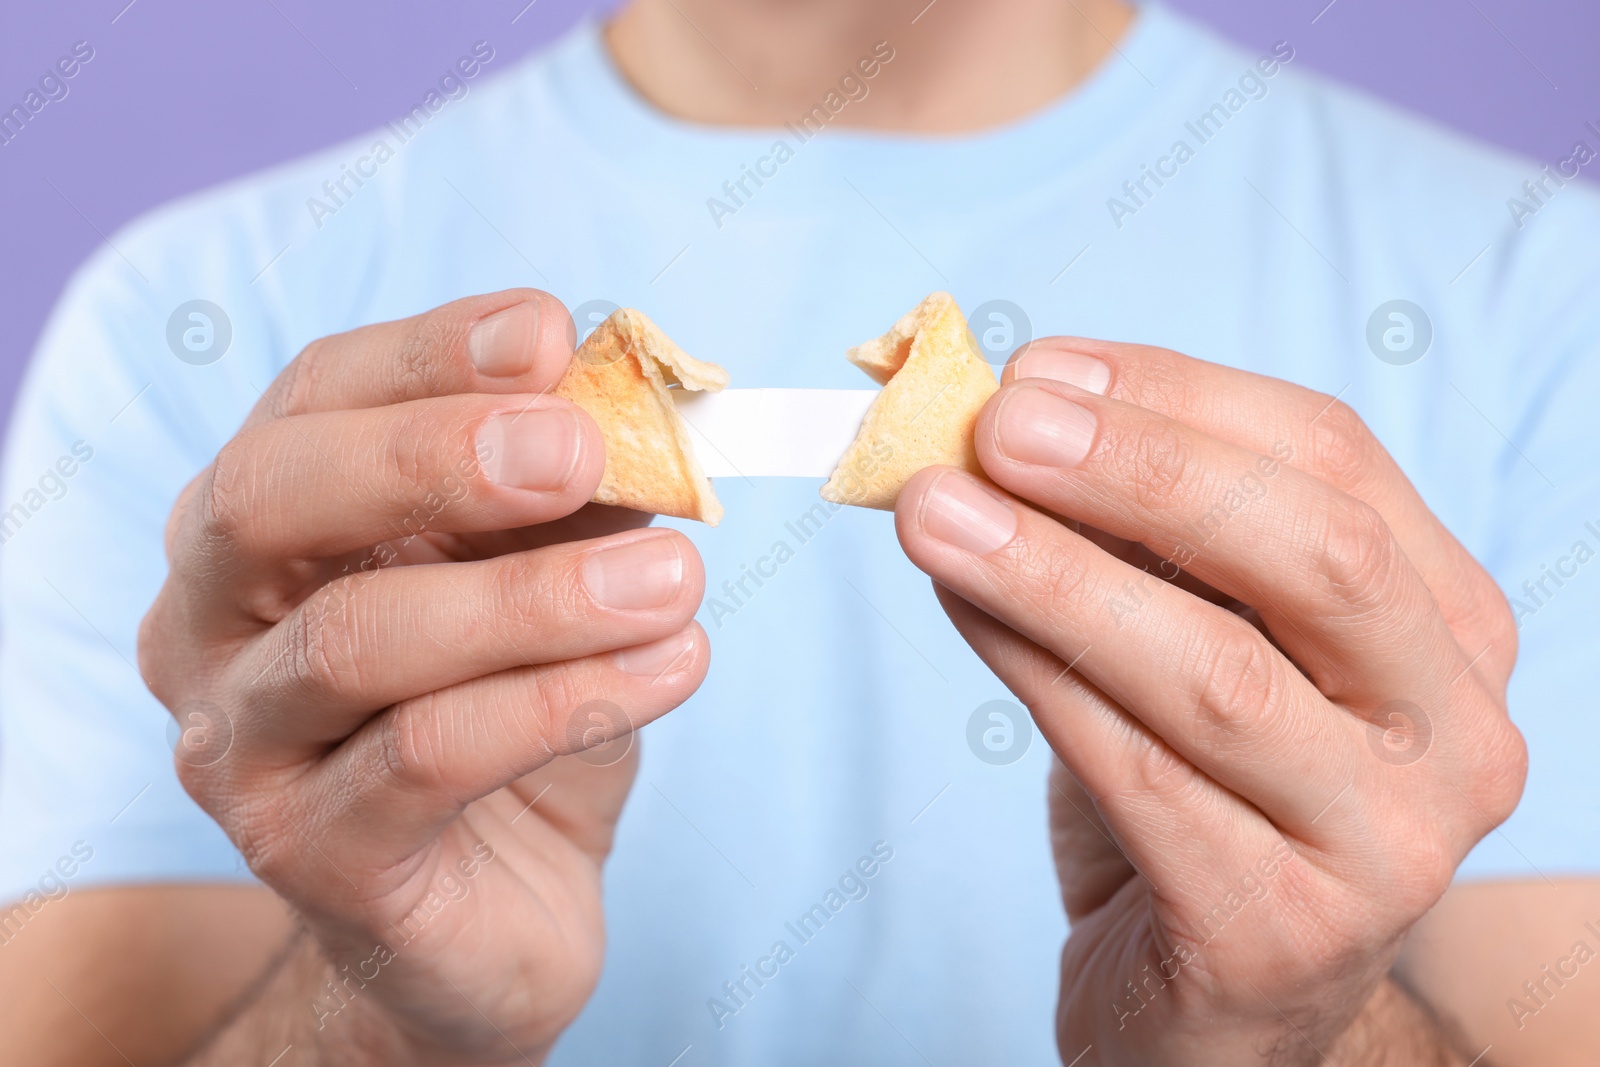 Photo of Man holding tasty fortune cookie with prediction on violet background, closeup